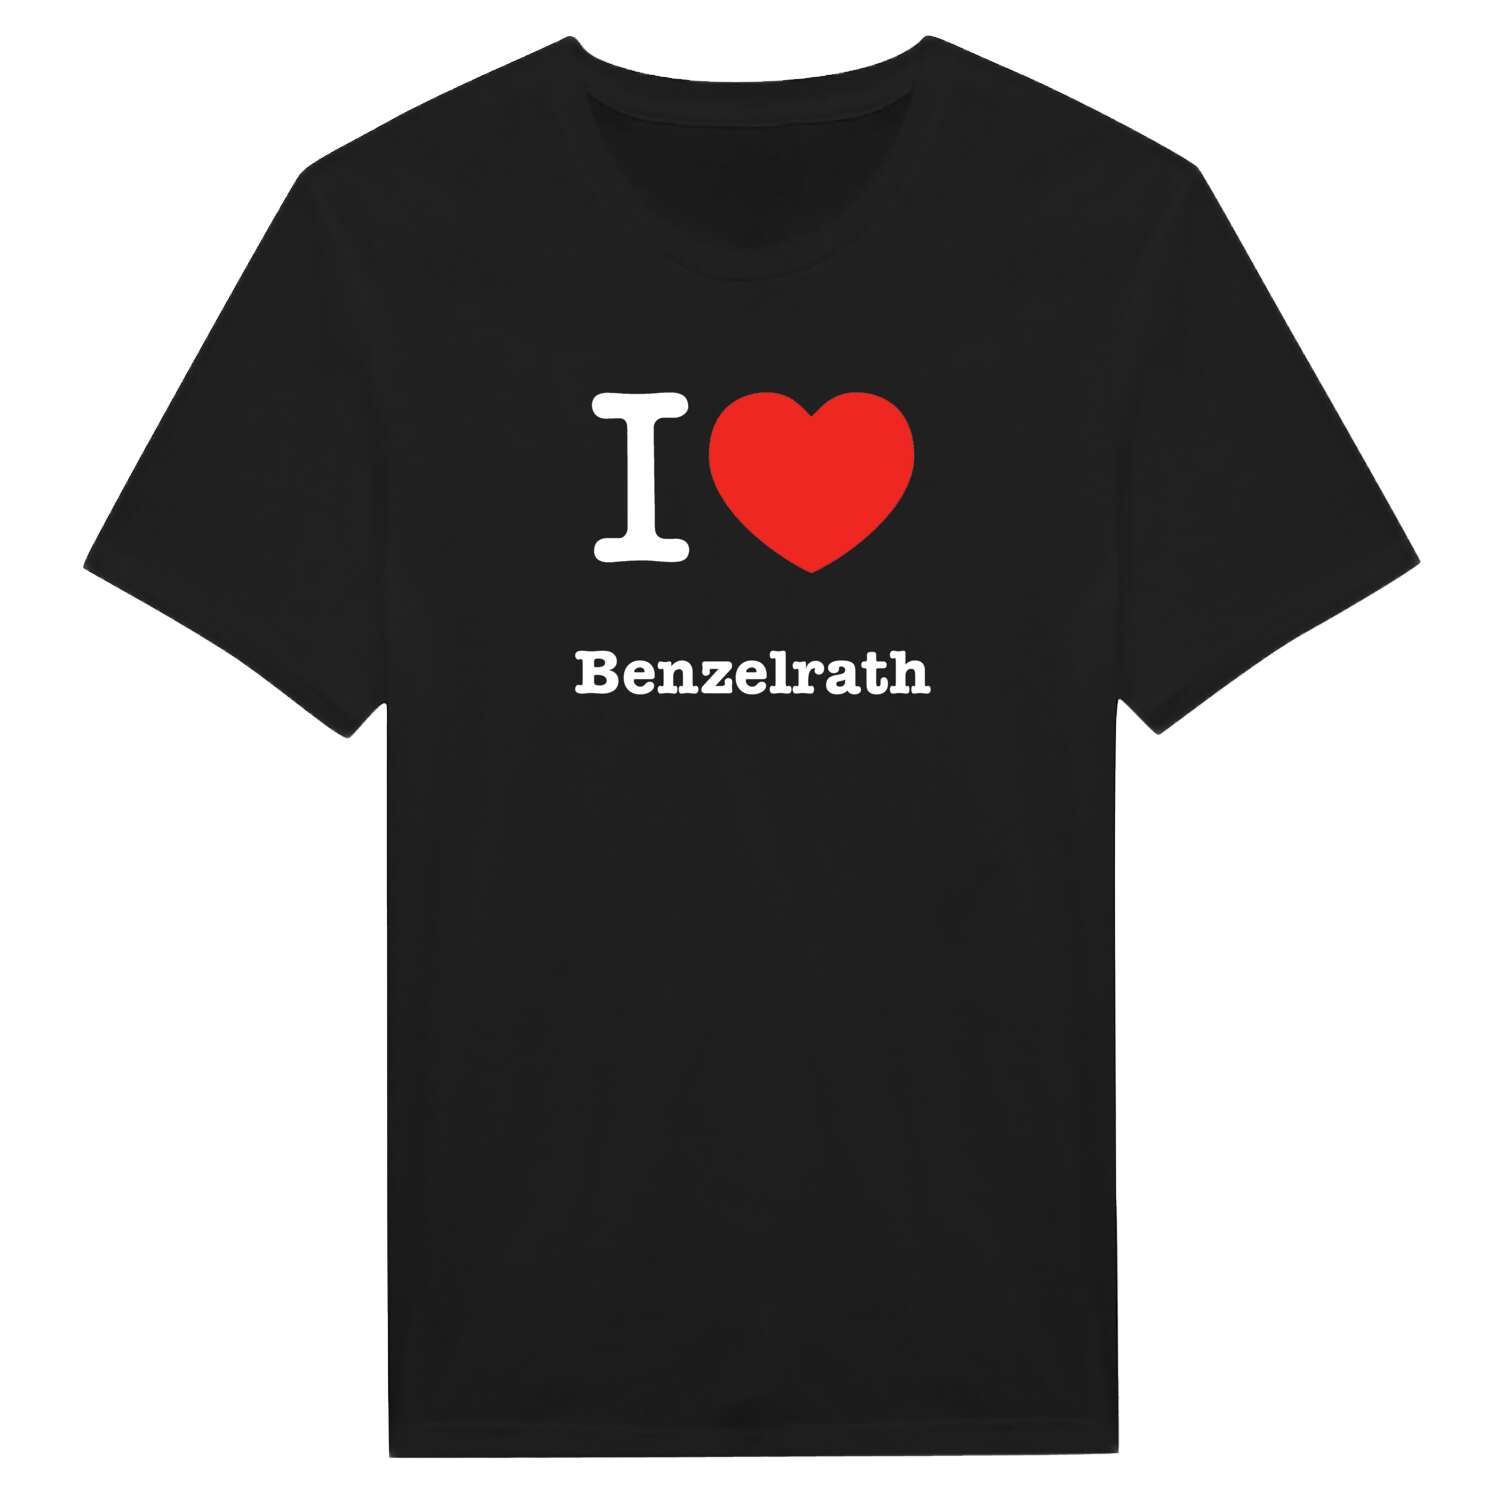 Benzelrath T-Shirt »I love«